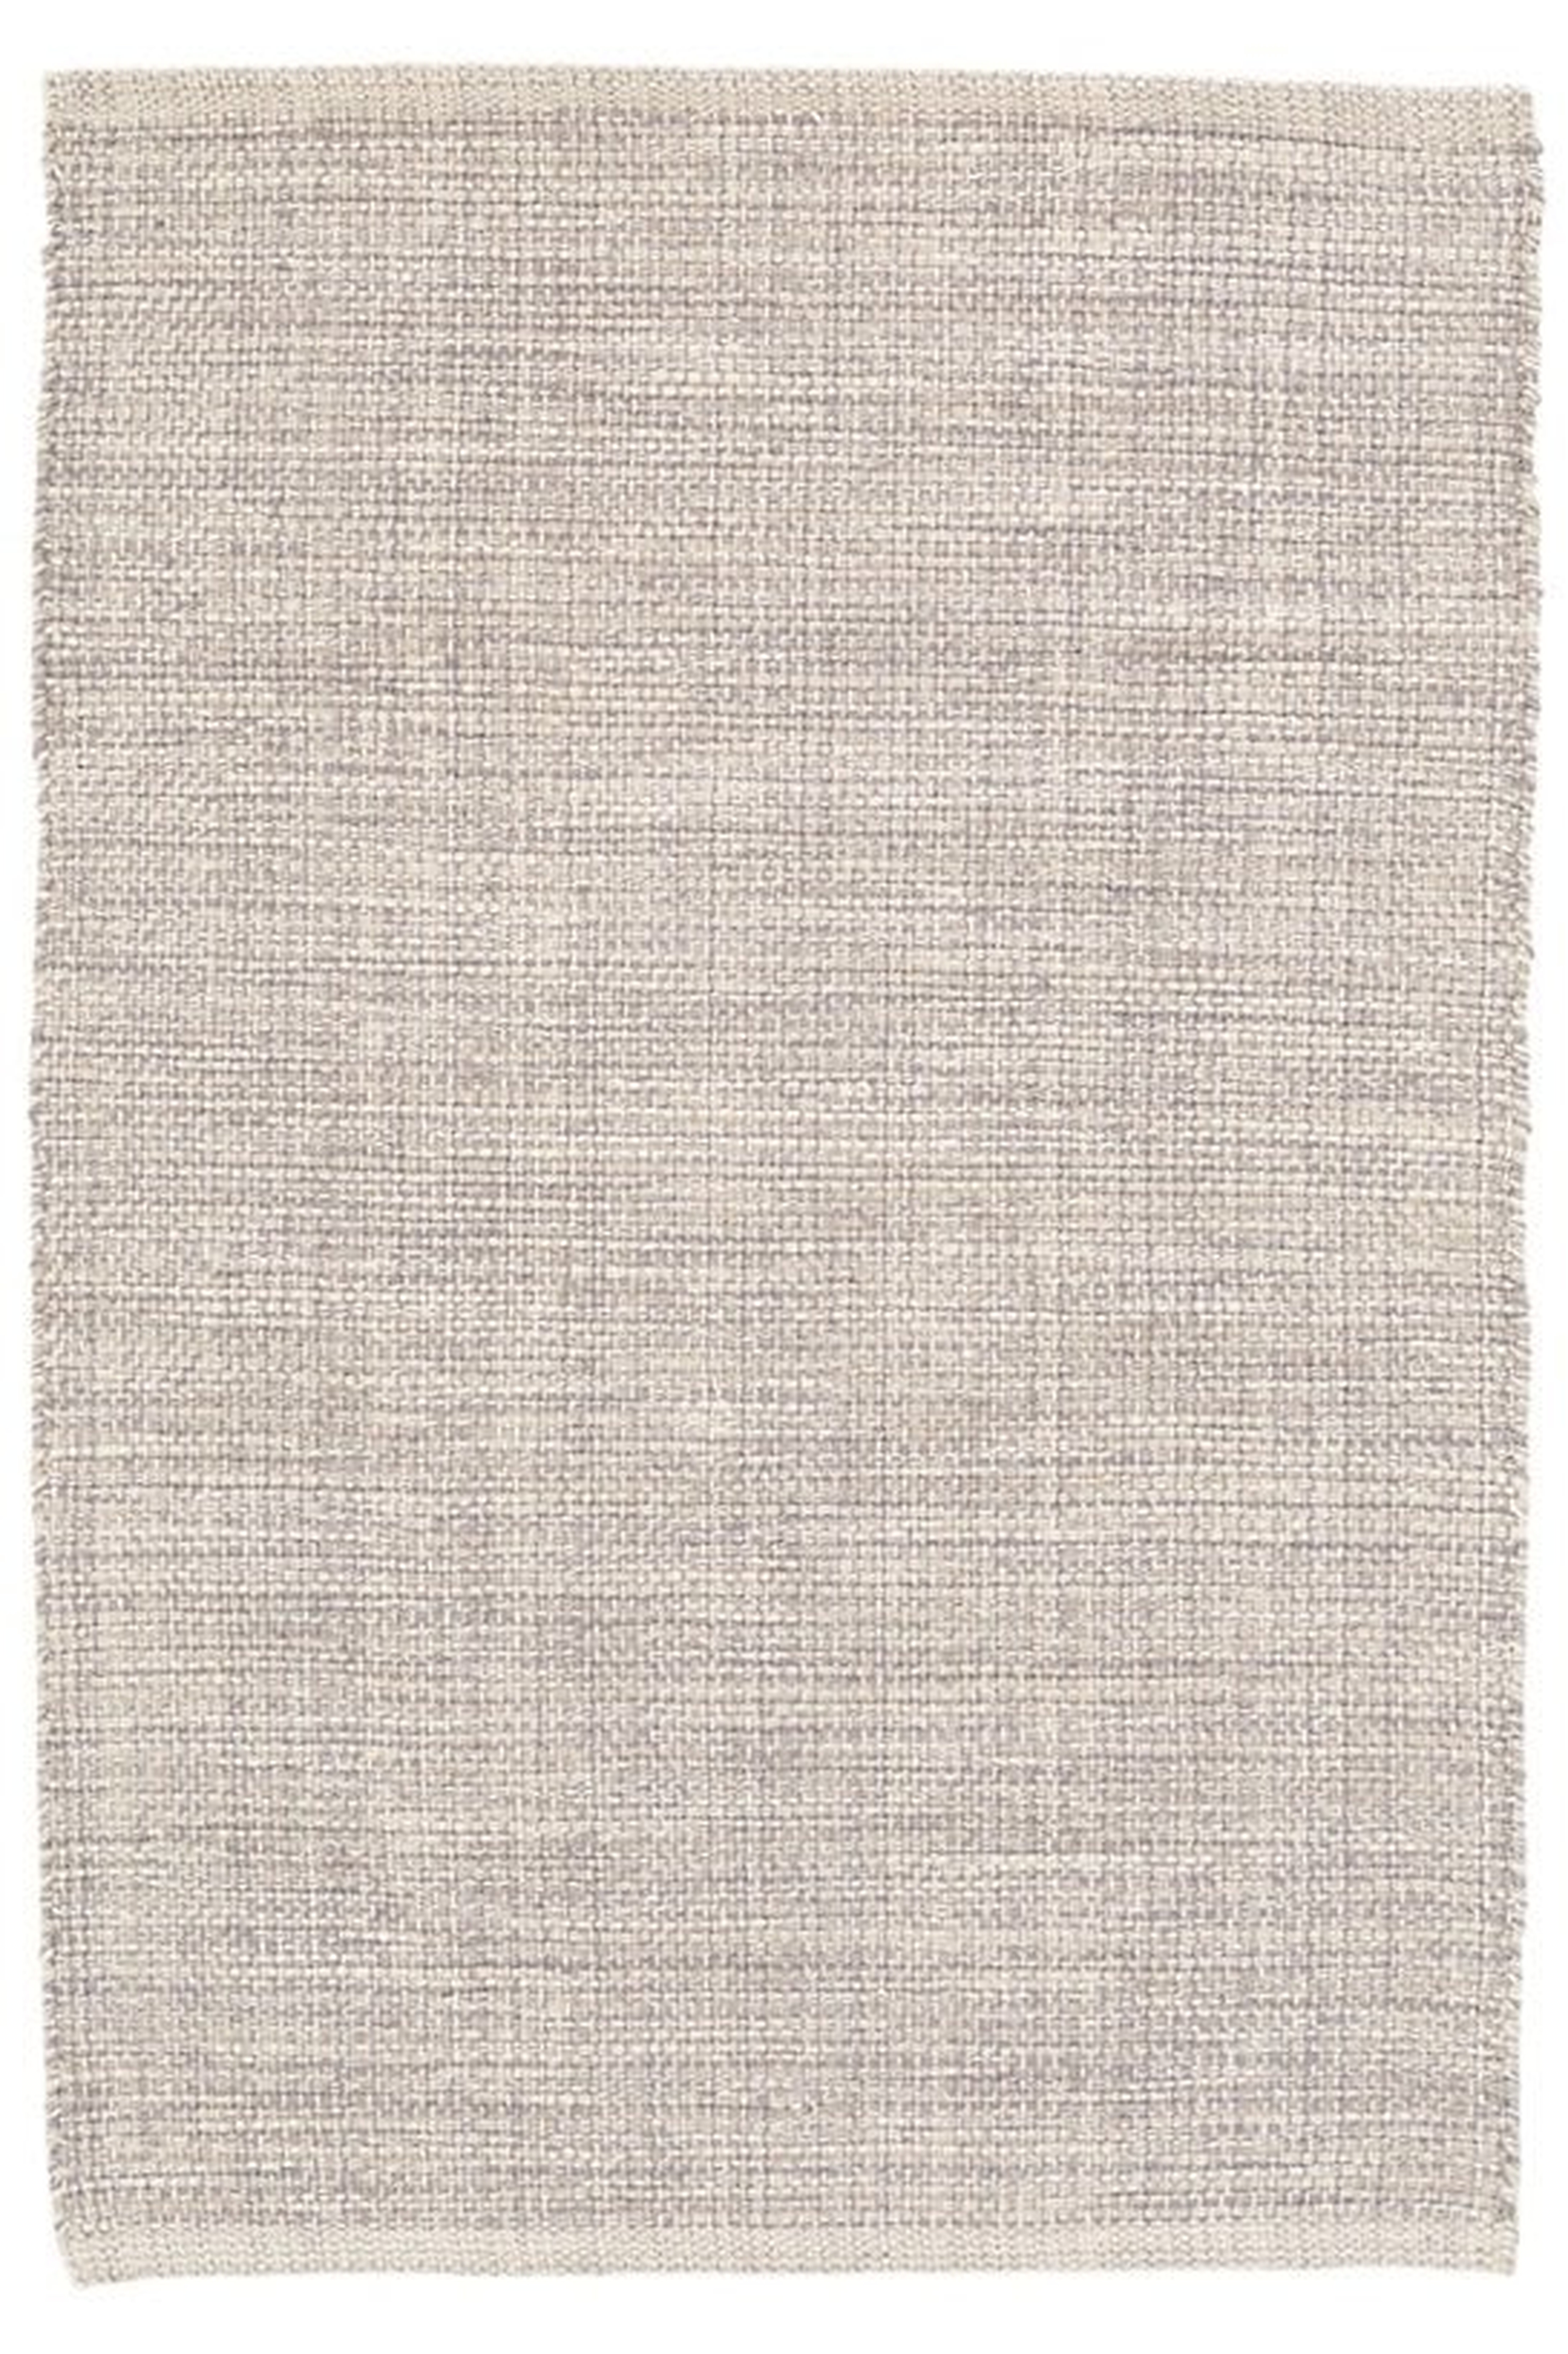 MARLED GREY WOVEN COTTON RUG - 6' x 9' - Dash and Albert